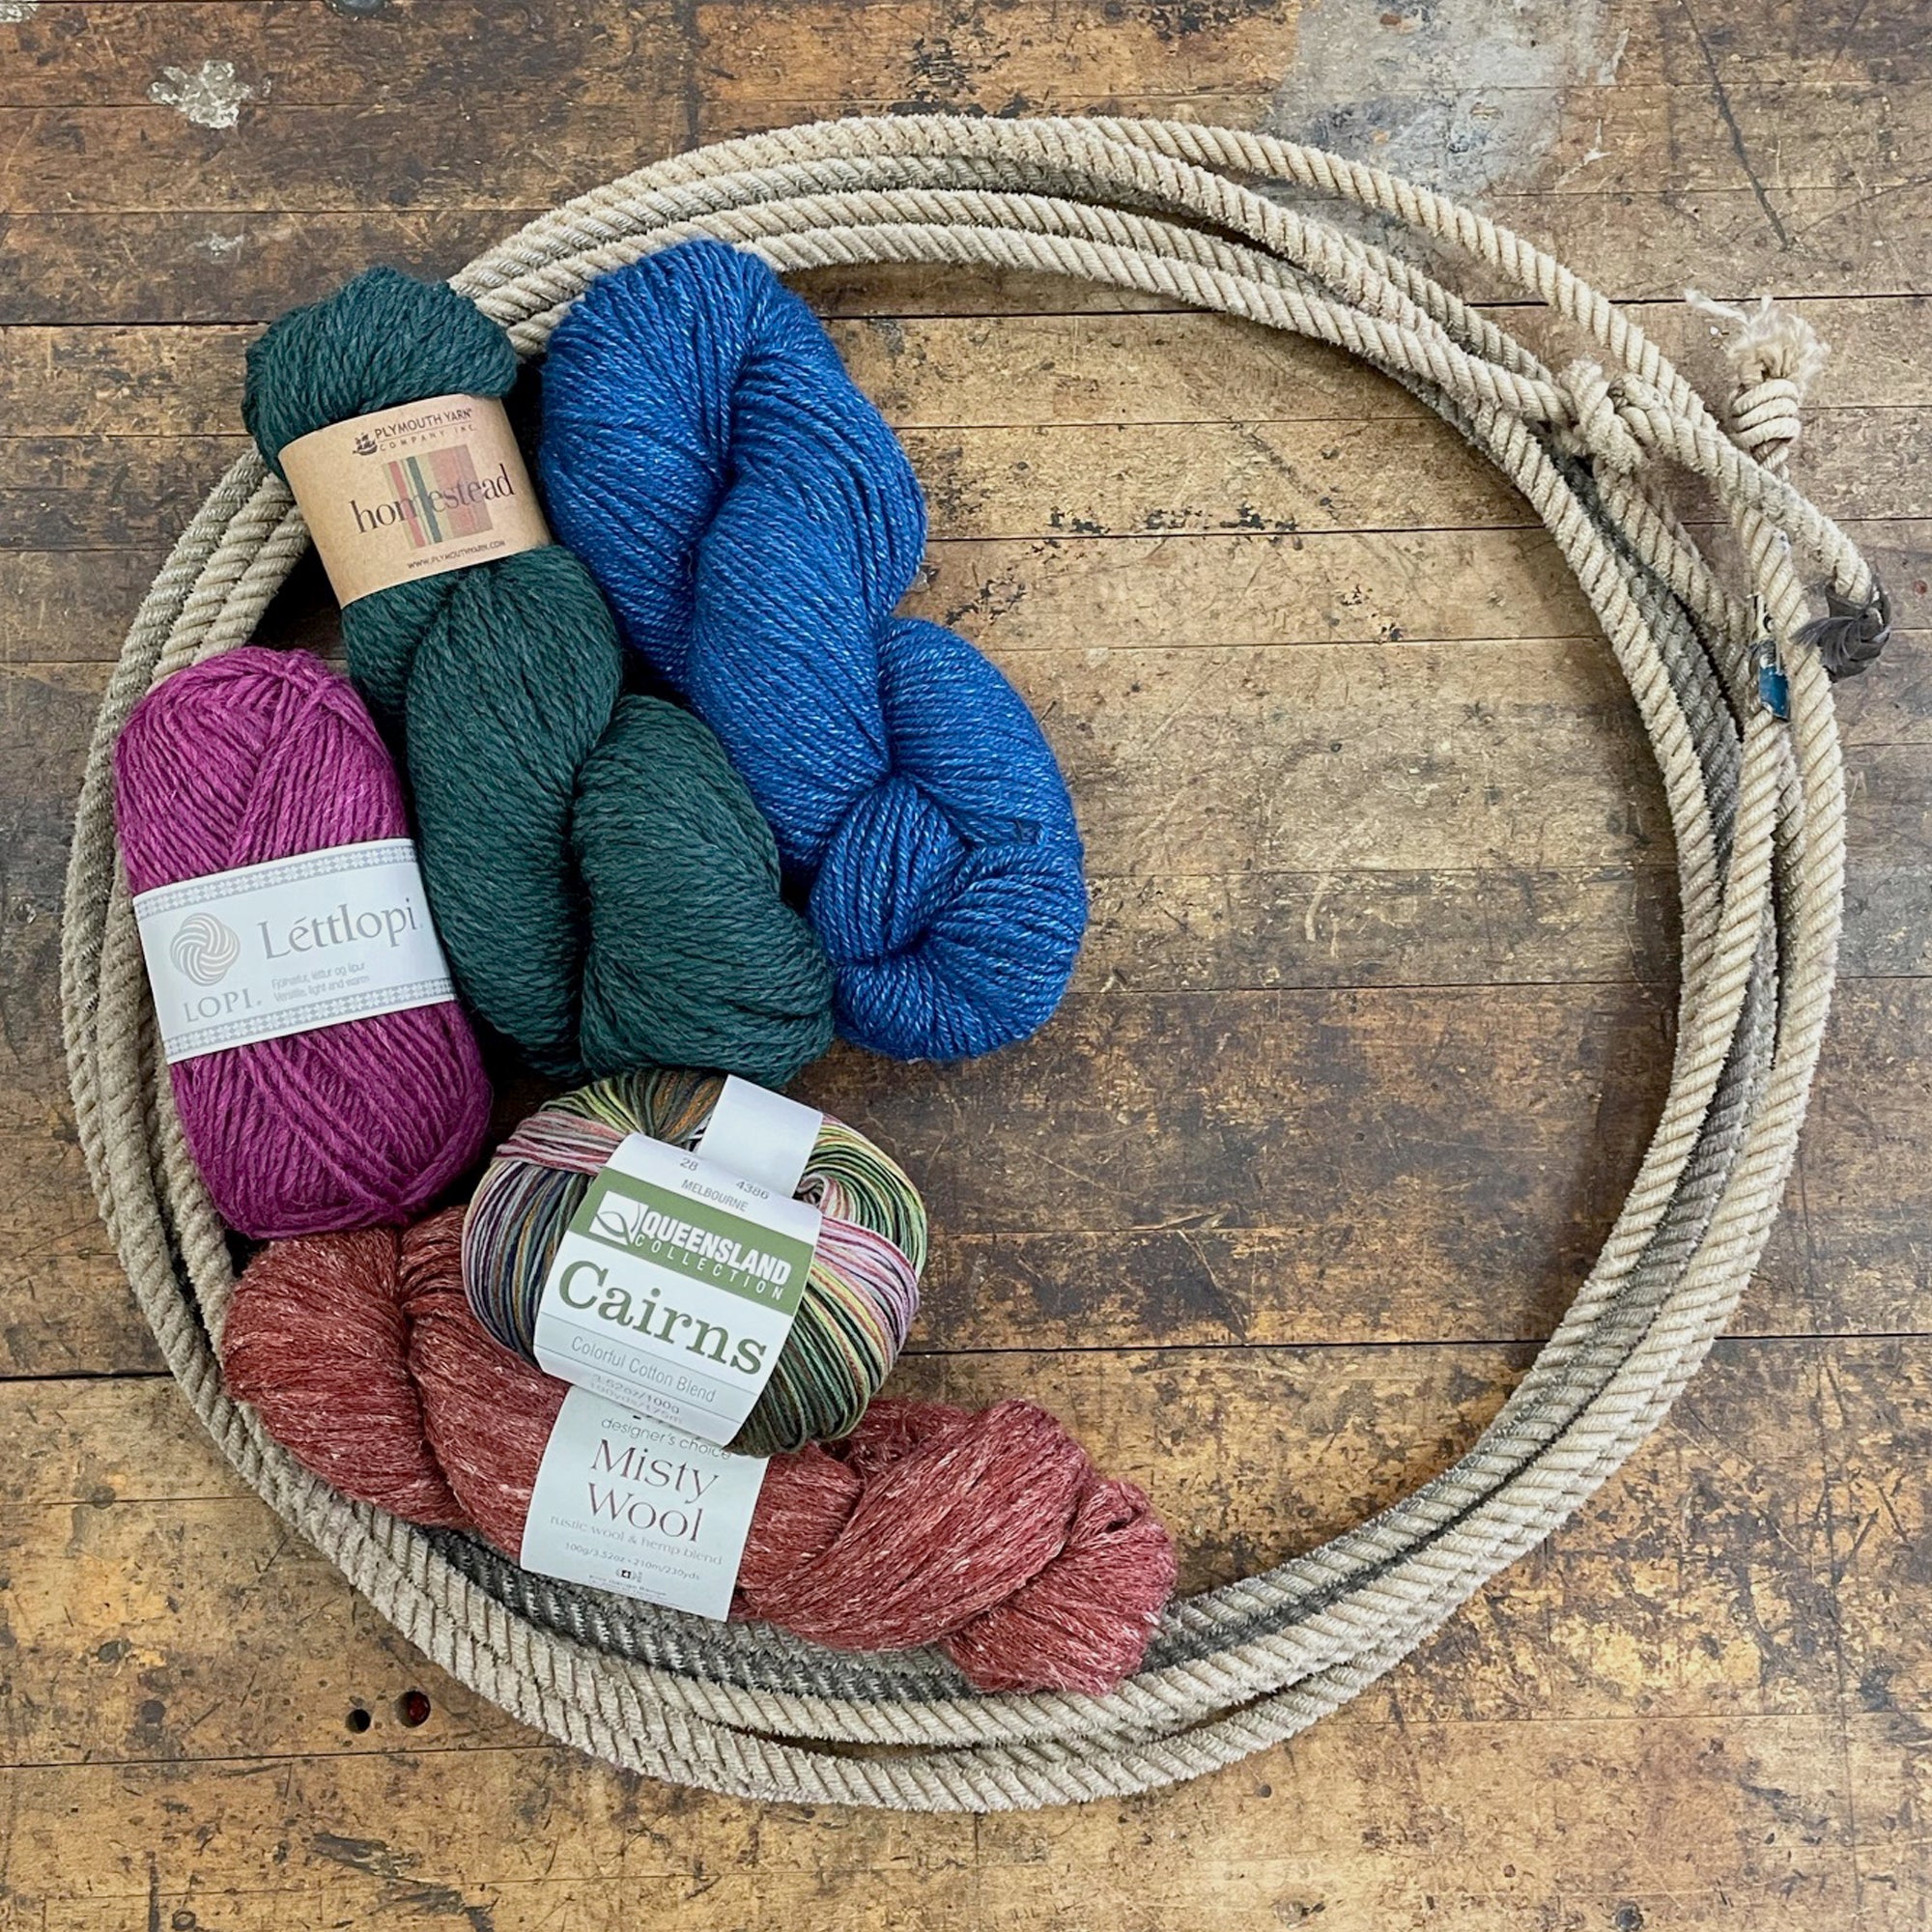 A lariat filled with Aran weight yarn